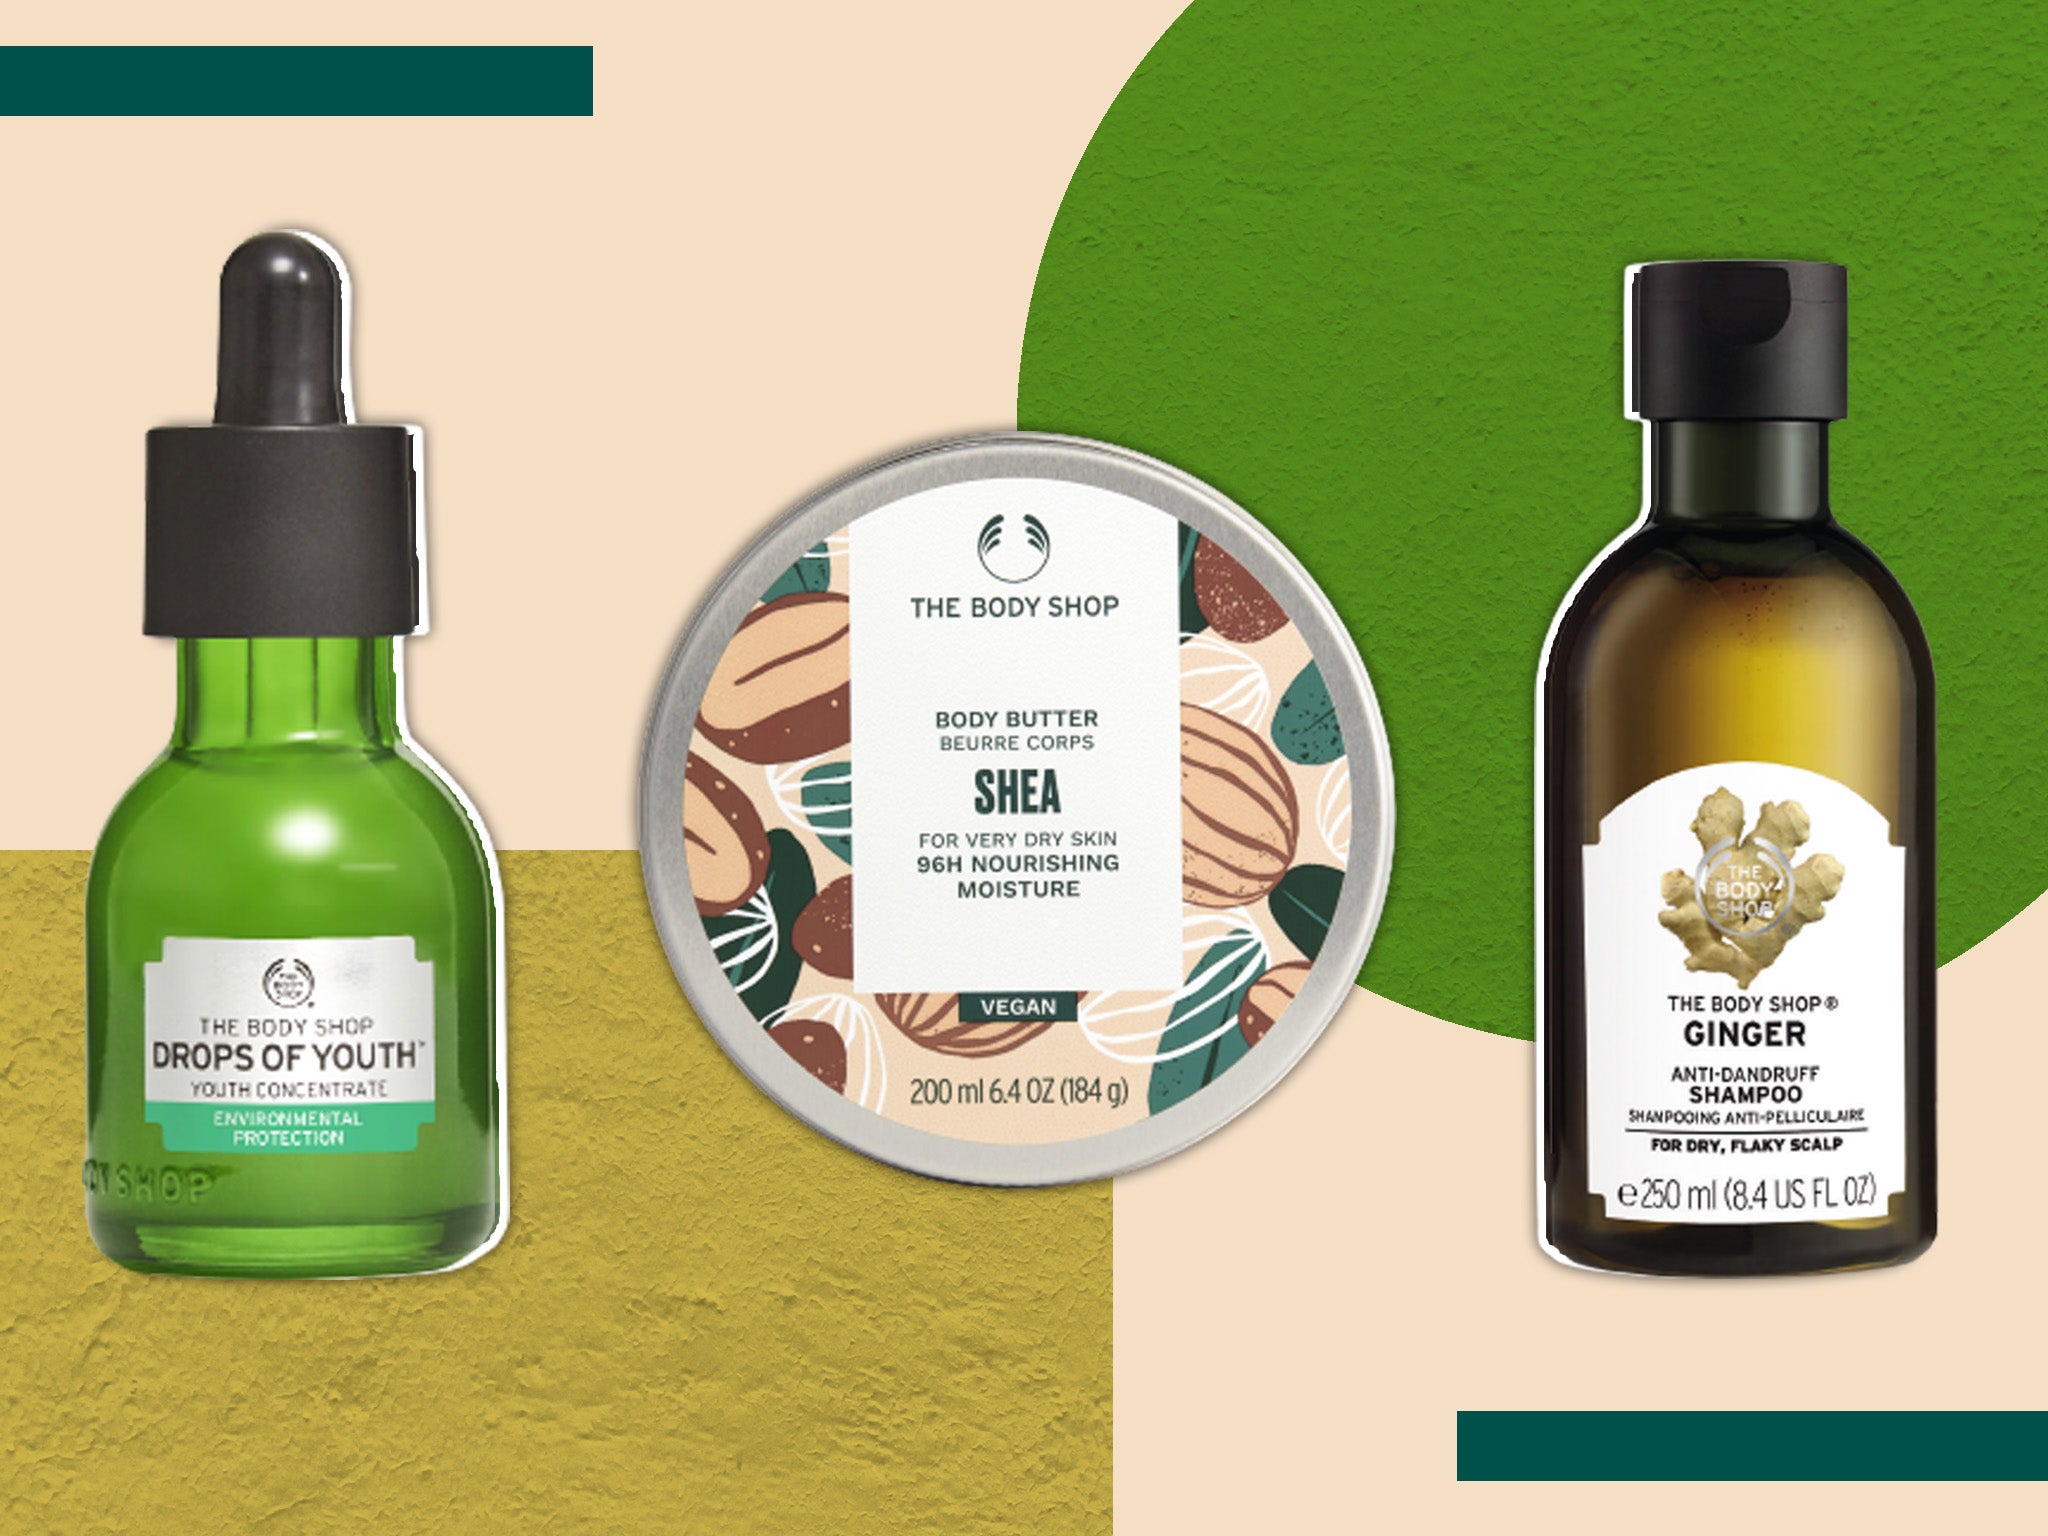 The Body Shop's bestseller round up: From body butter to makeup